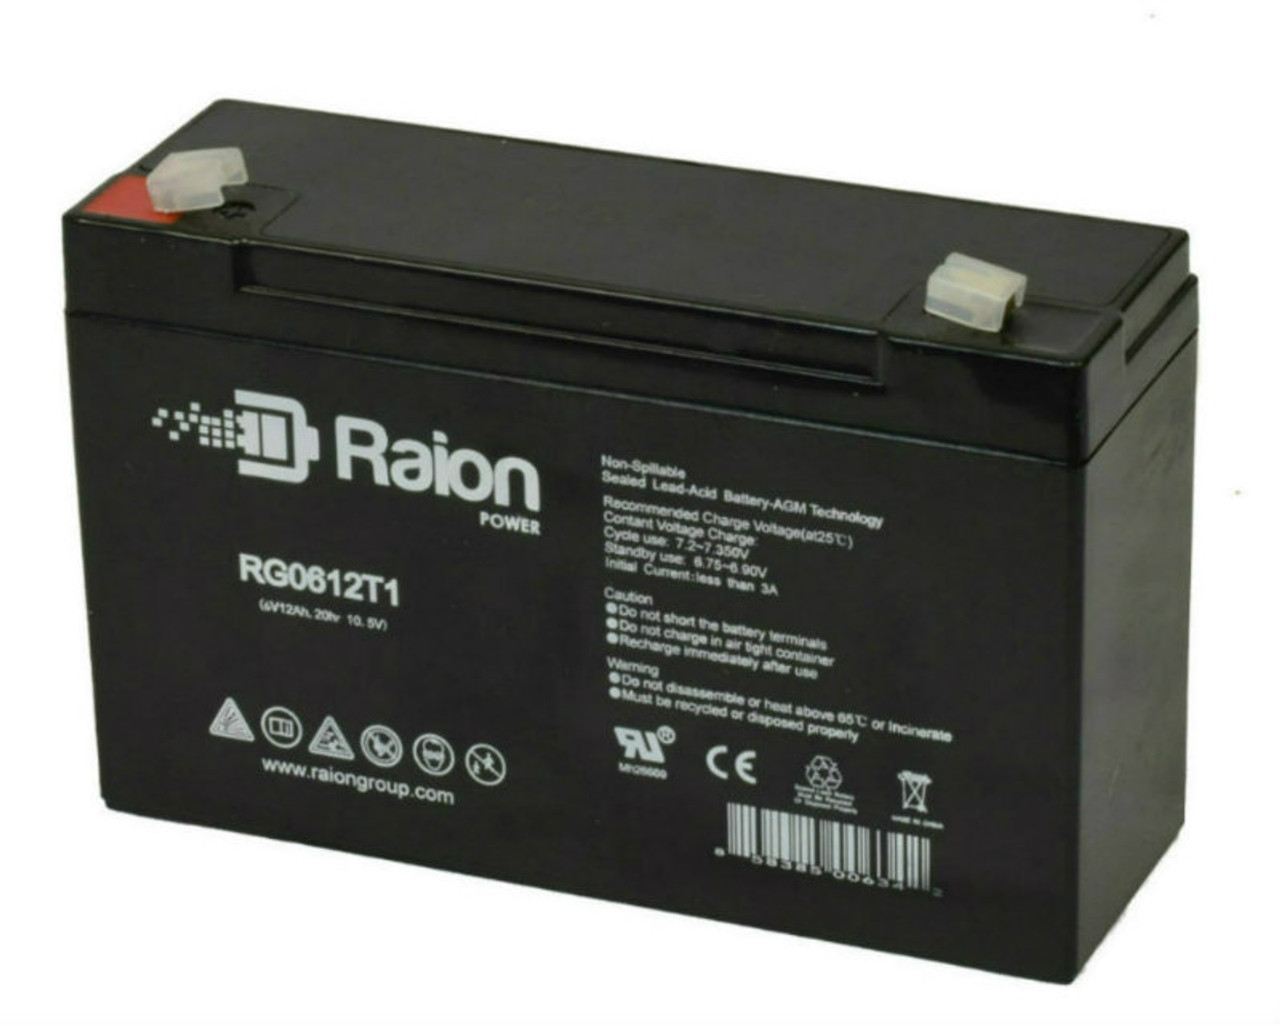 Raion Power RG06120T1 Replacement Emergency Light Battery for Sentry Lite PM695